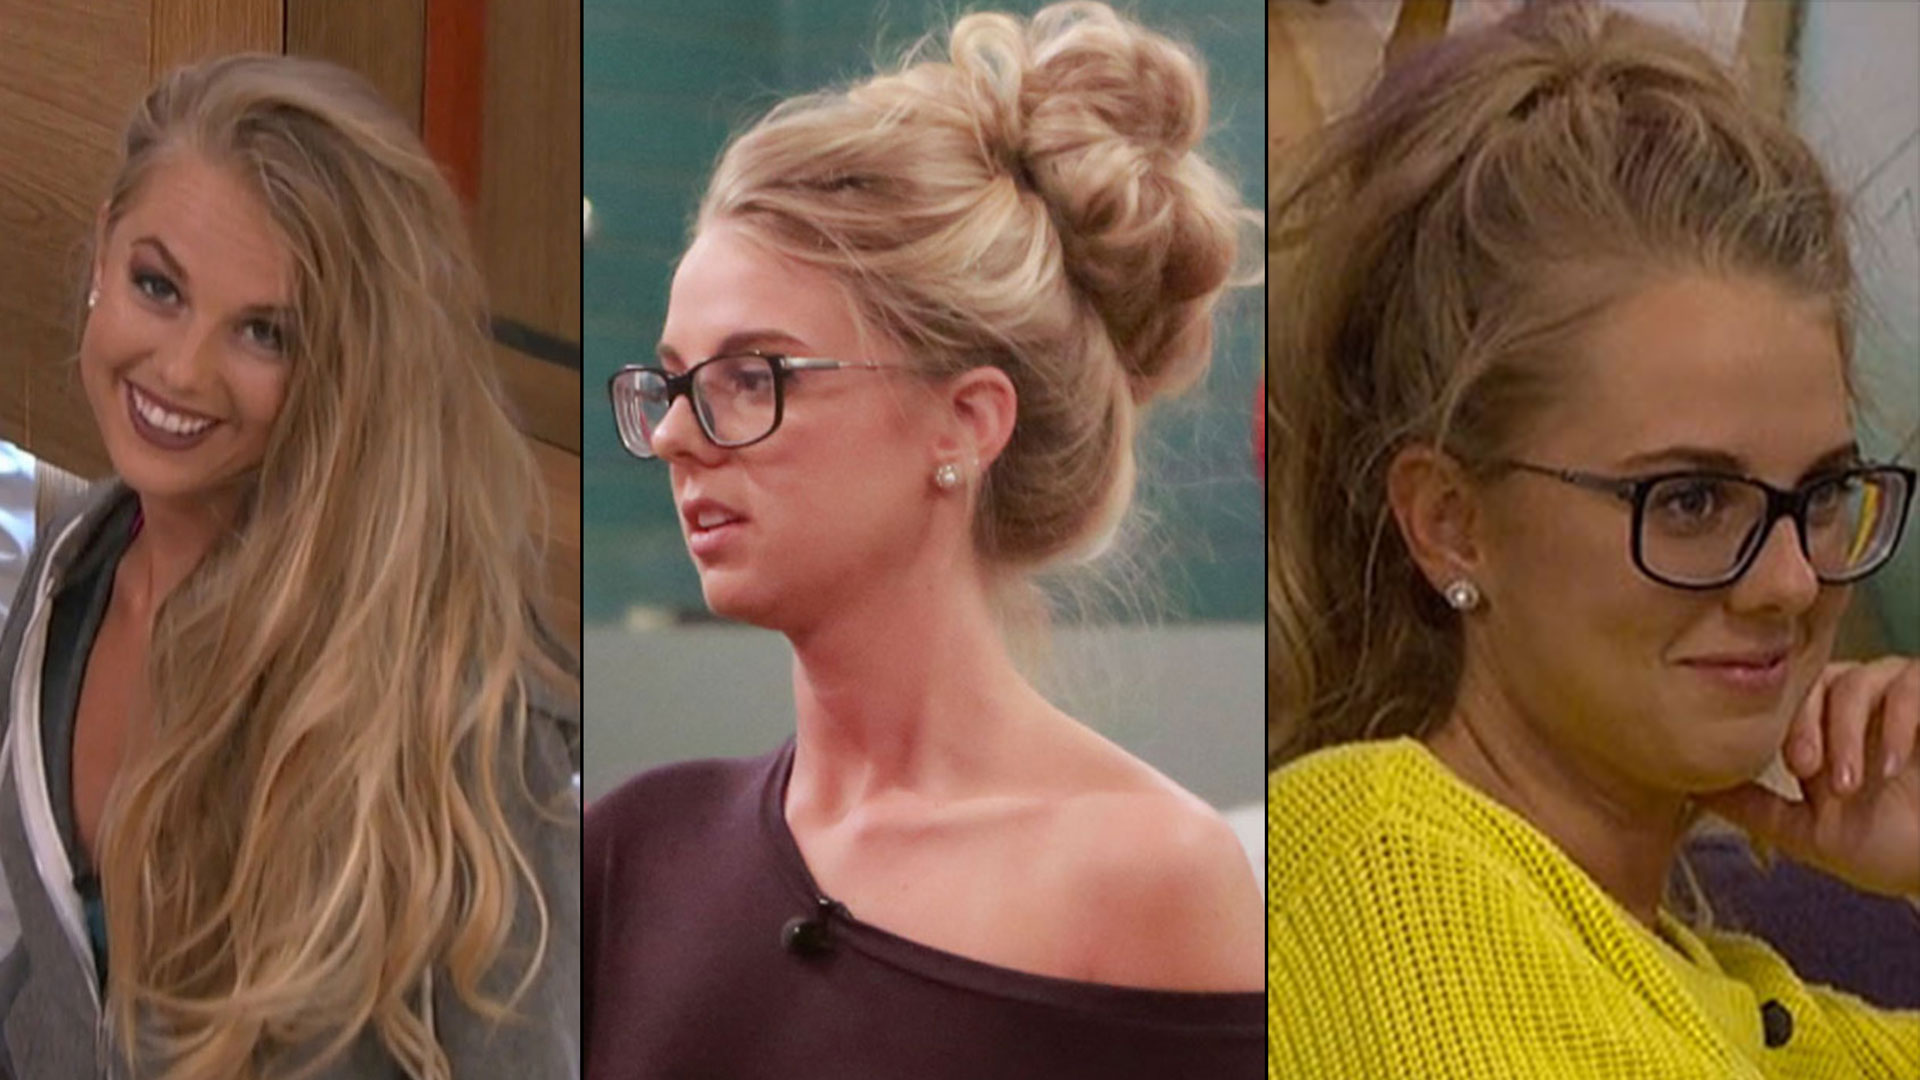 Since the start of Season 18, Nicole has been rocking a variety of fun hair...